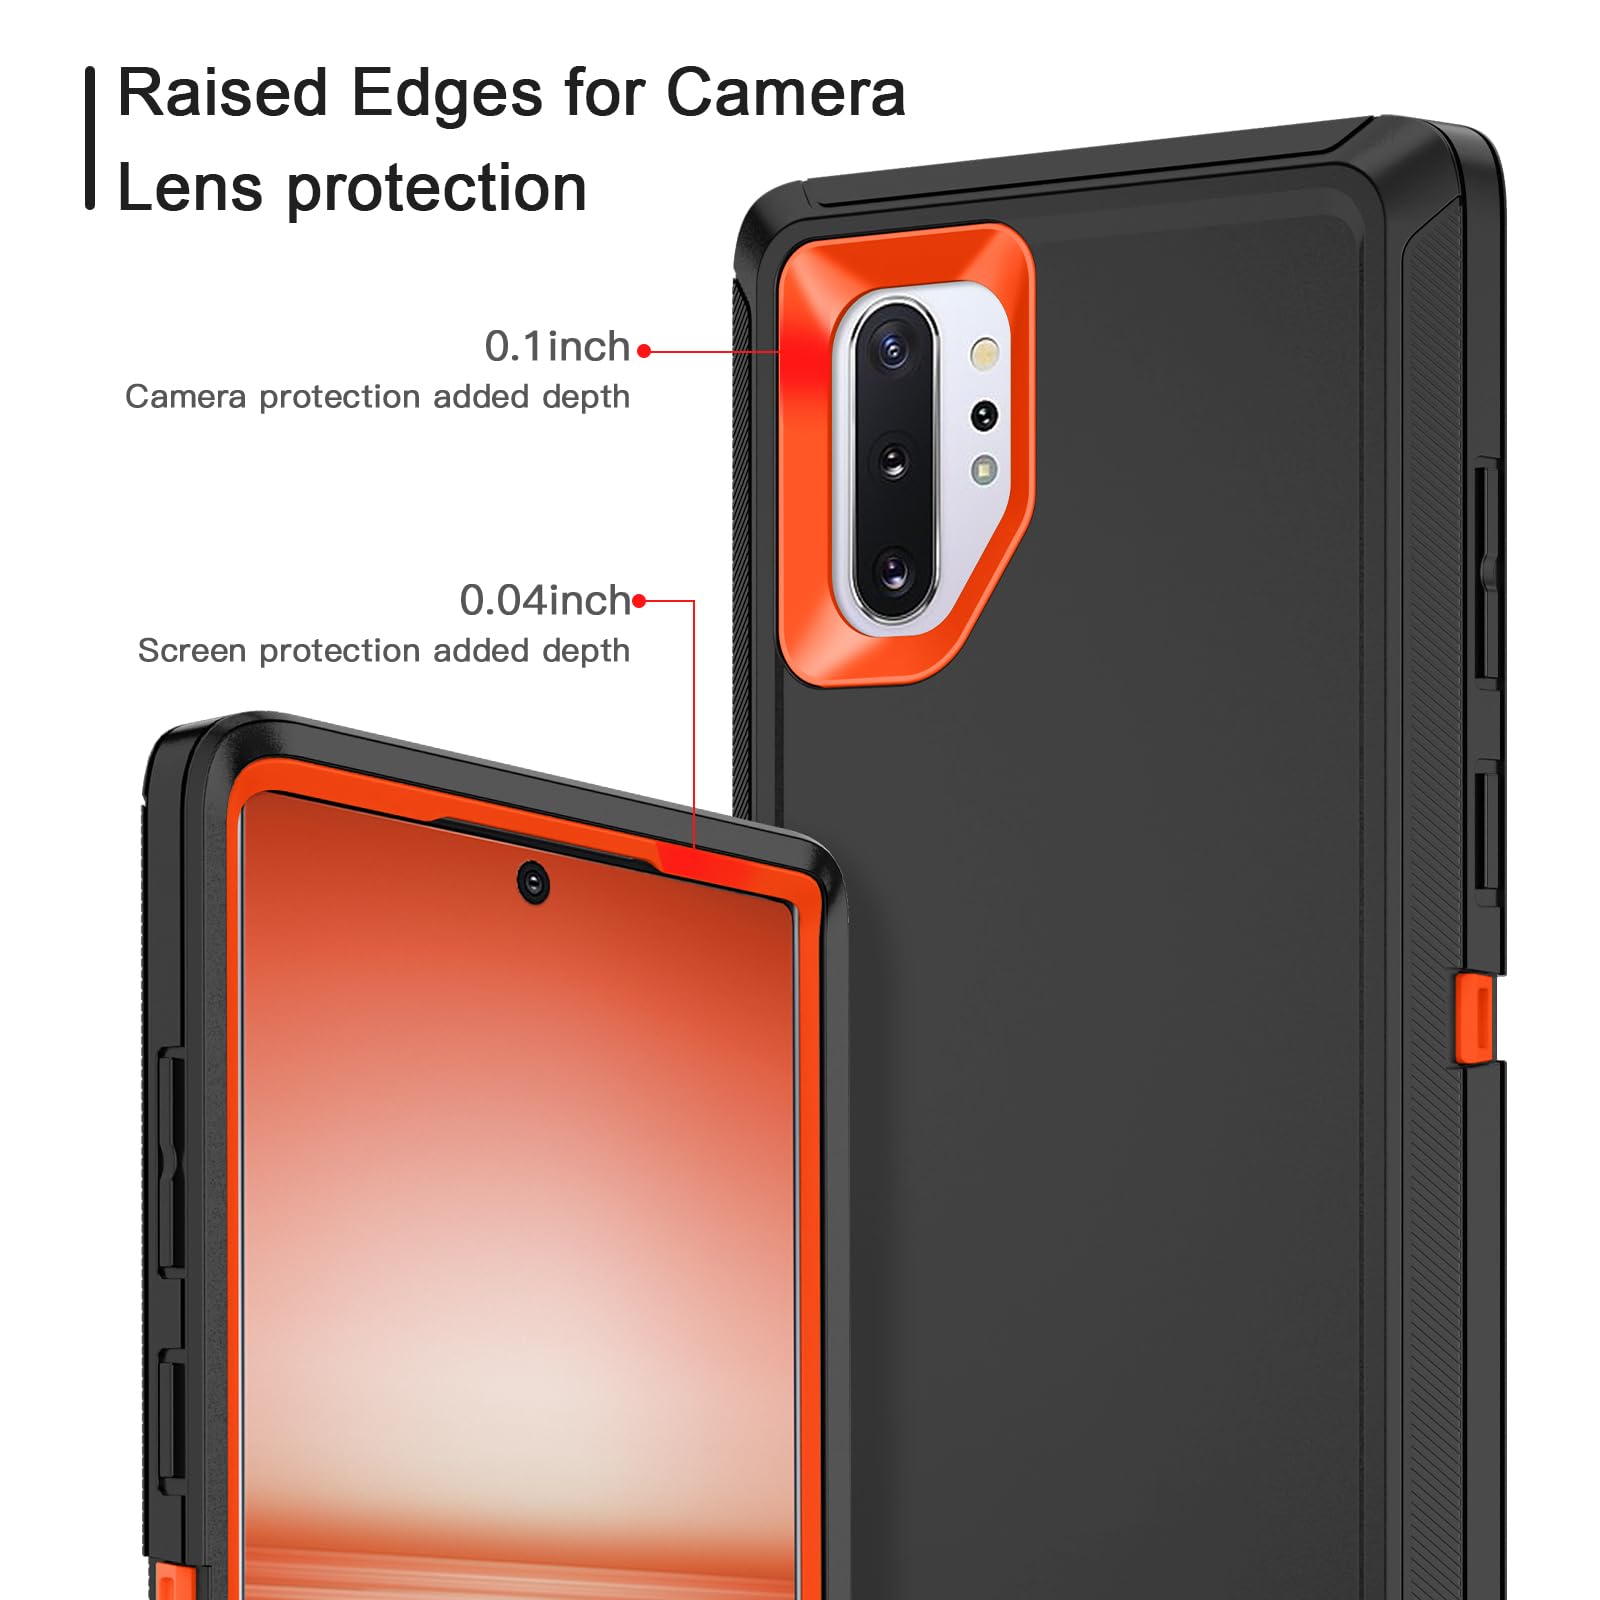 I-HONVA for Galaxy Note 10 Plus Case Shockproof Dust/Drop Proof 3-Layer Full Body Protection [Without Screen Protector] Heavy Duty Durable Cover Case for Samsung Galaxy Note 10 Plus,Black/Orange